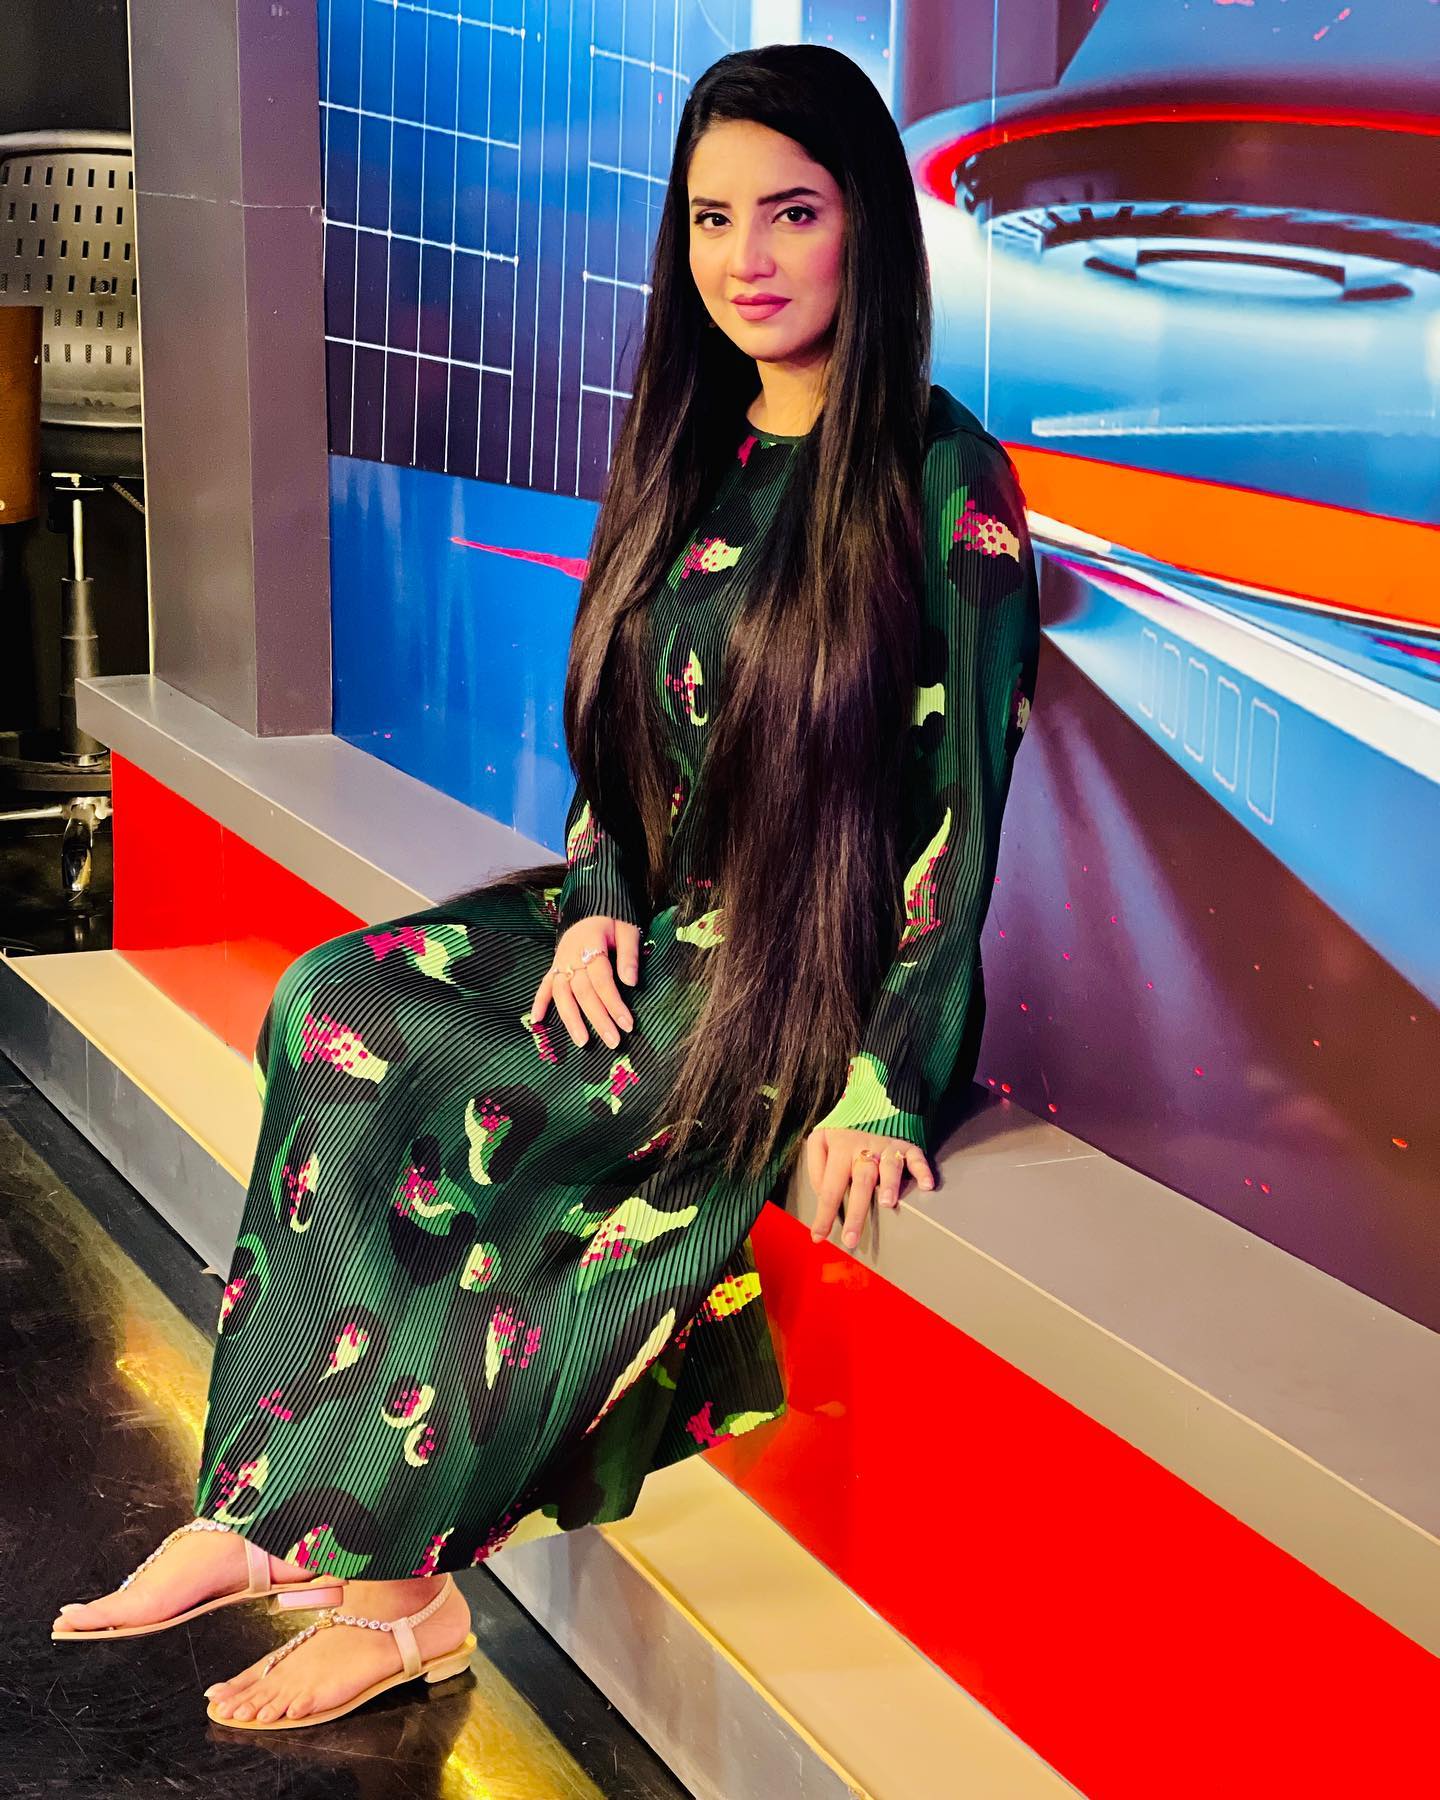 Kiran Naz is one of the best female Pakistani news anchors